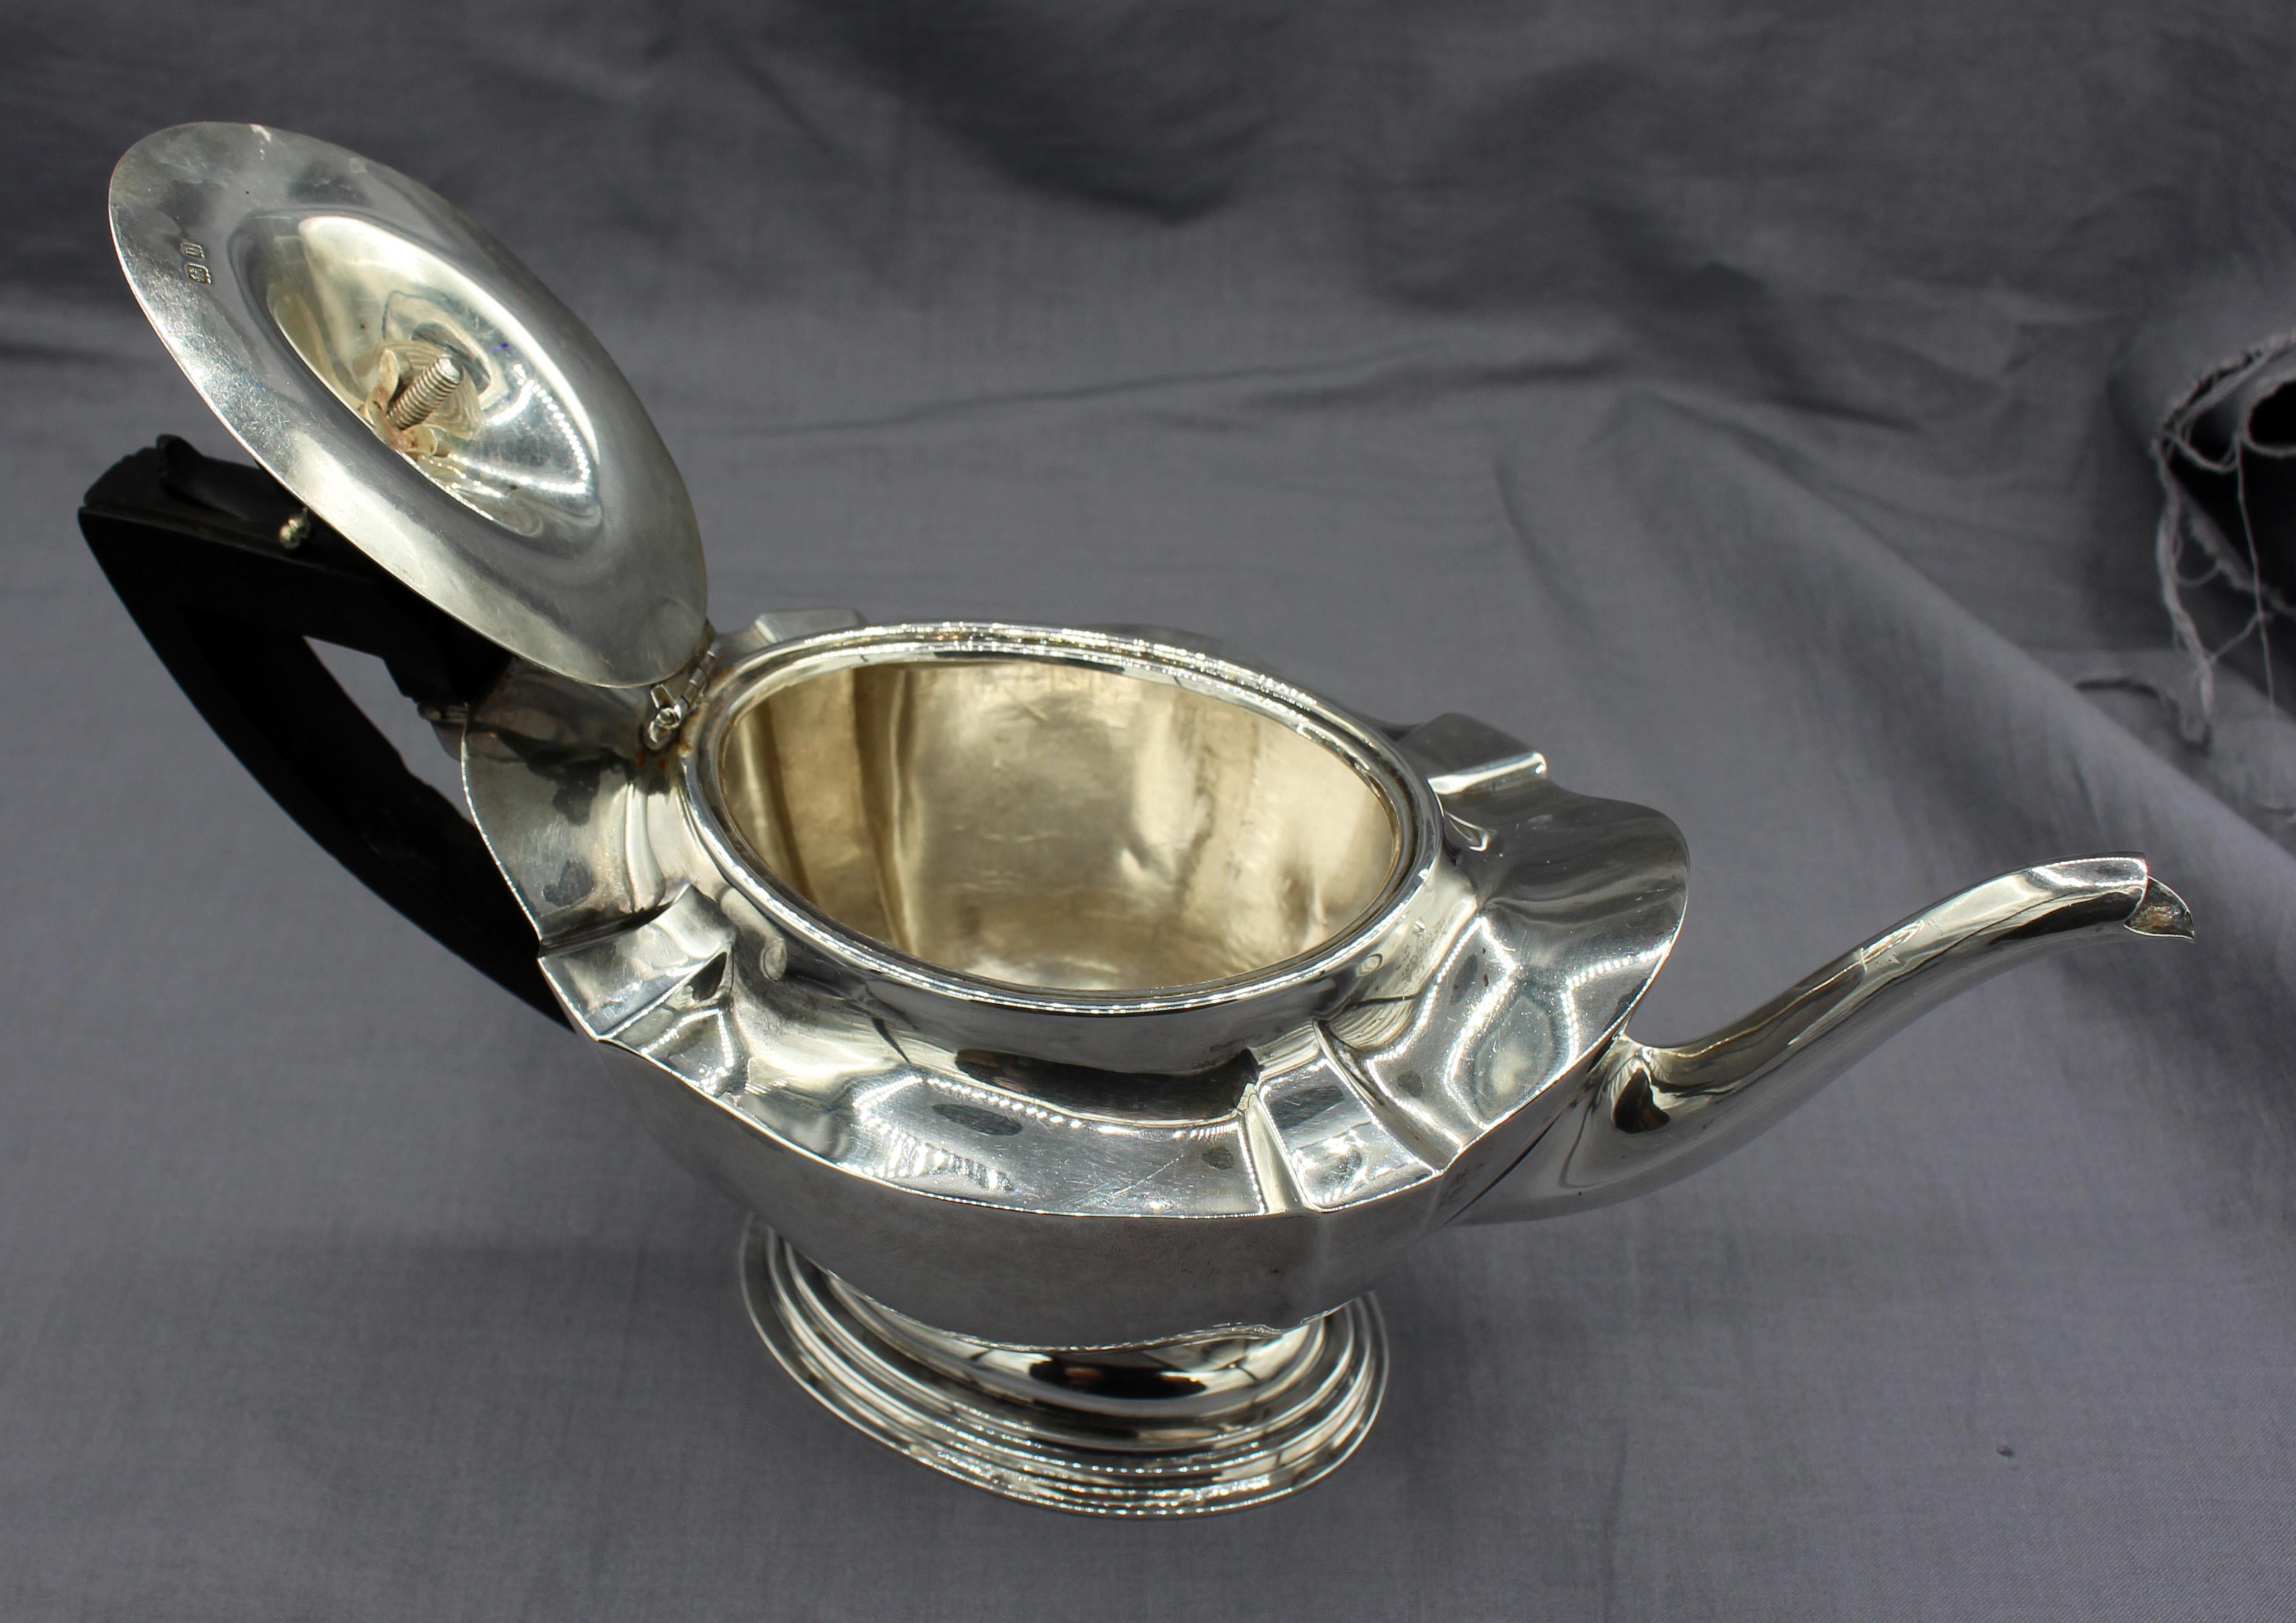 1912 English Neoclassical Revival Sterling Teapot For Sale 2